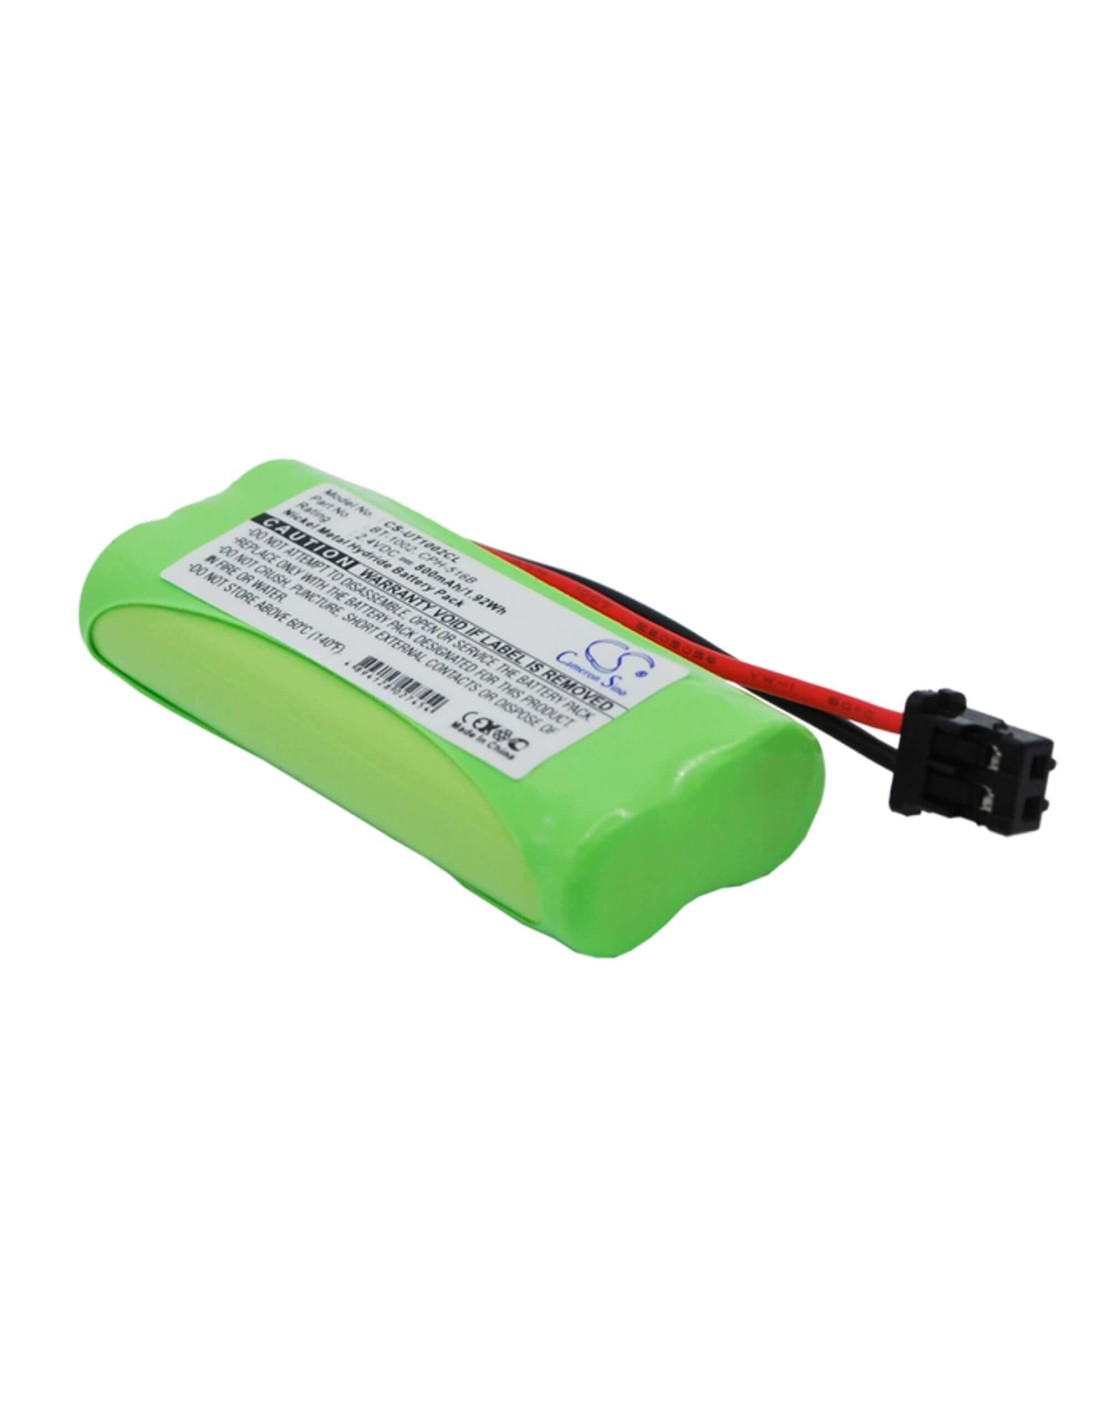 Battery for Sony, Dect 1060, Dect 1080 2.4V, 800mAh - 1.92Wh